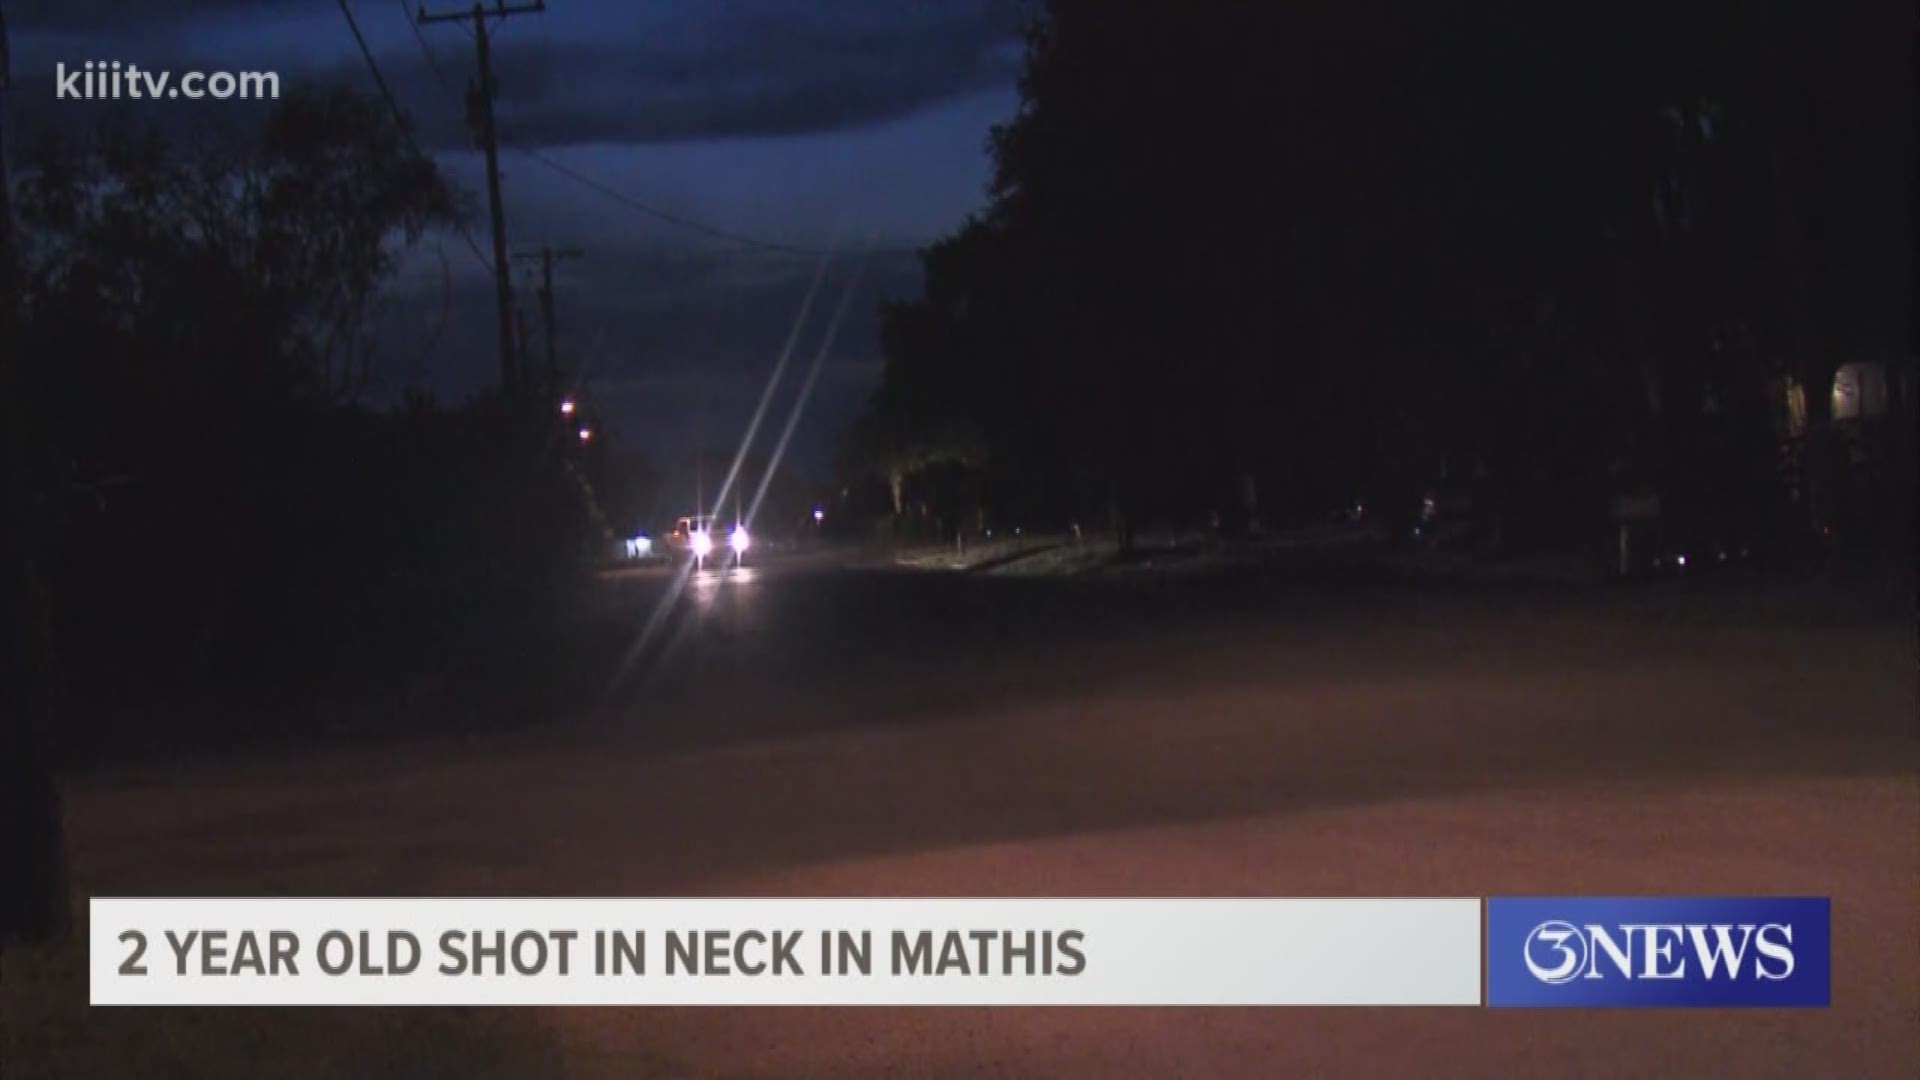 Mathis Police are investigating a shooting that sent a 2 year old to the hospital with a gunshot wound to the neck.